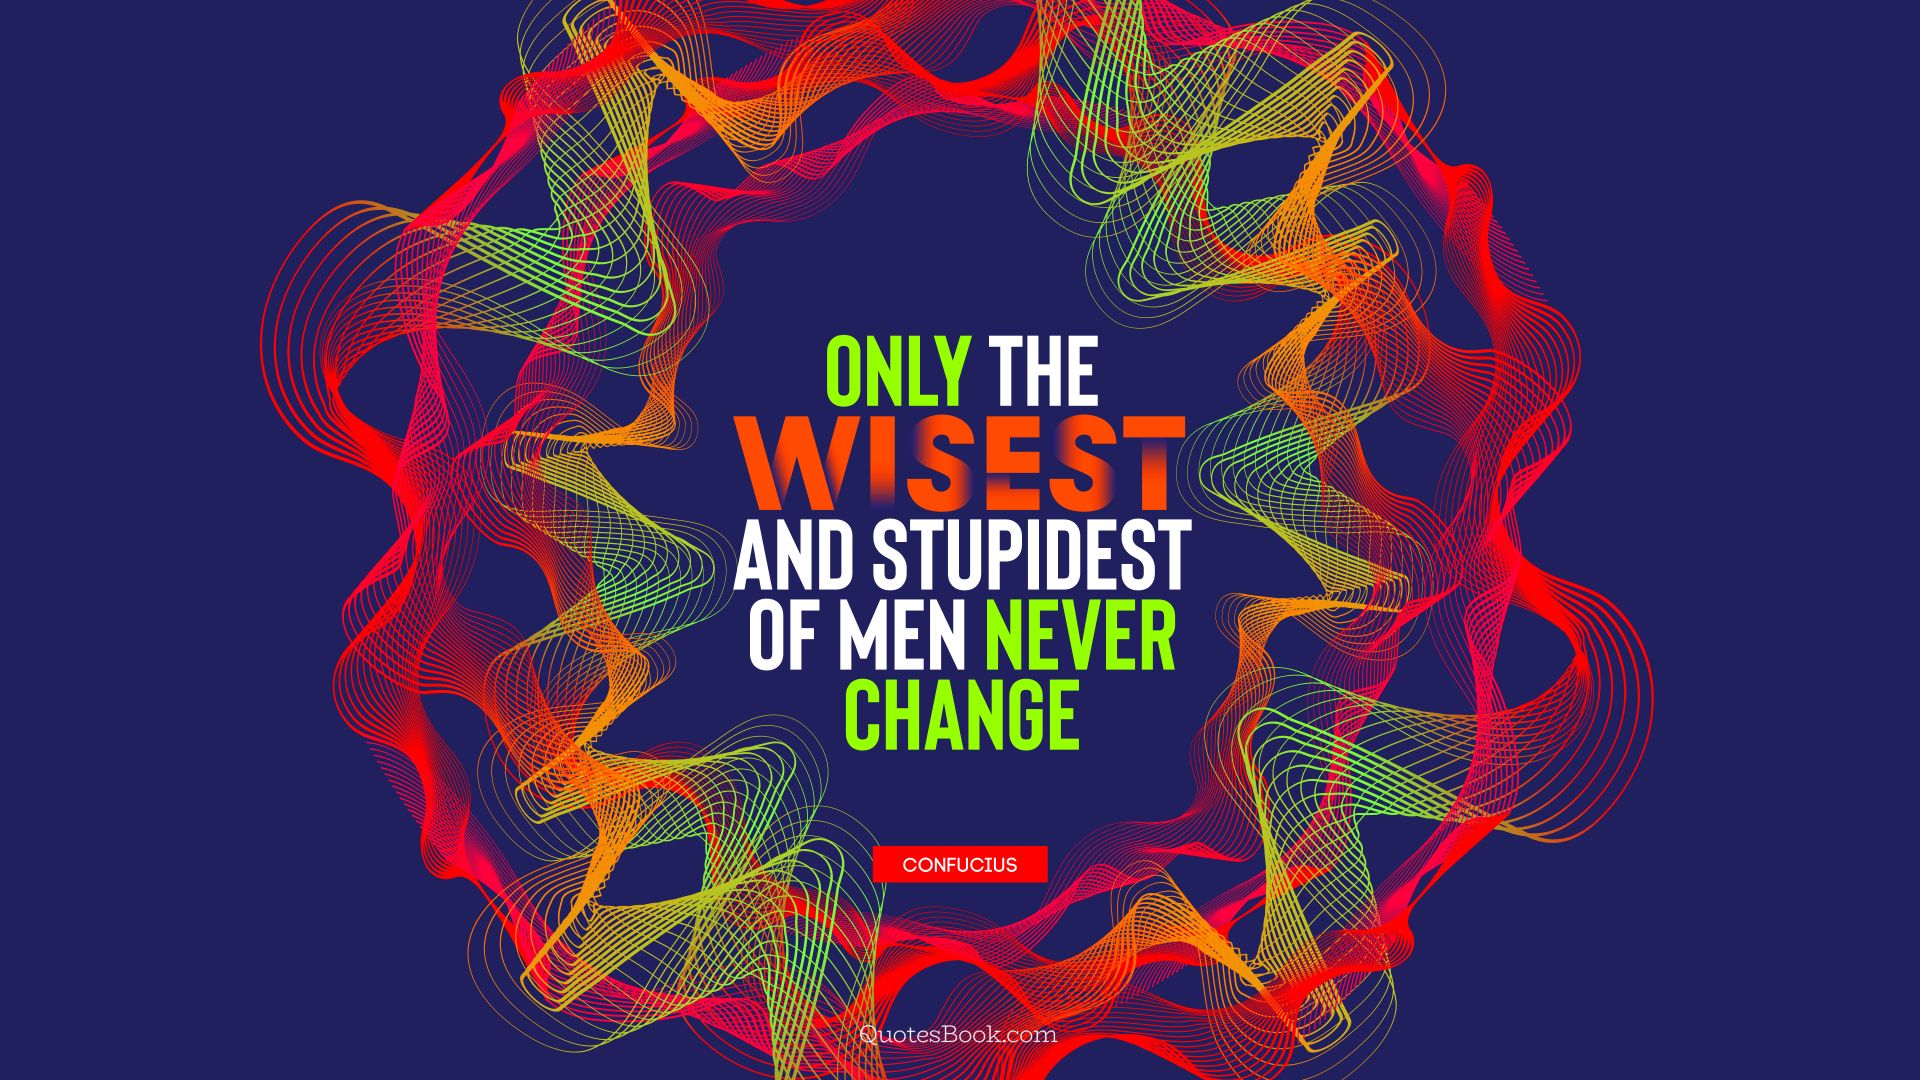 Only the wisest and stupidest of men never change. - Quote by Confucius